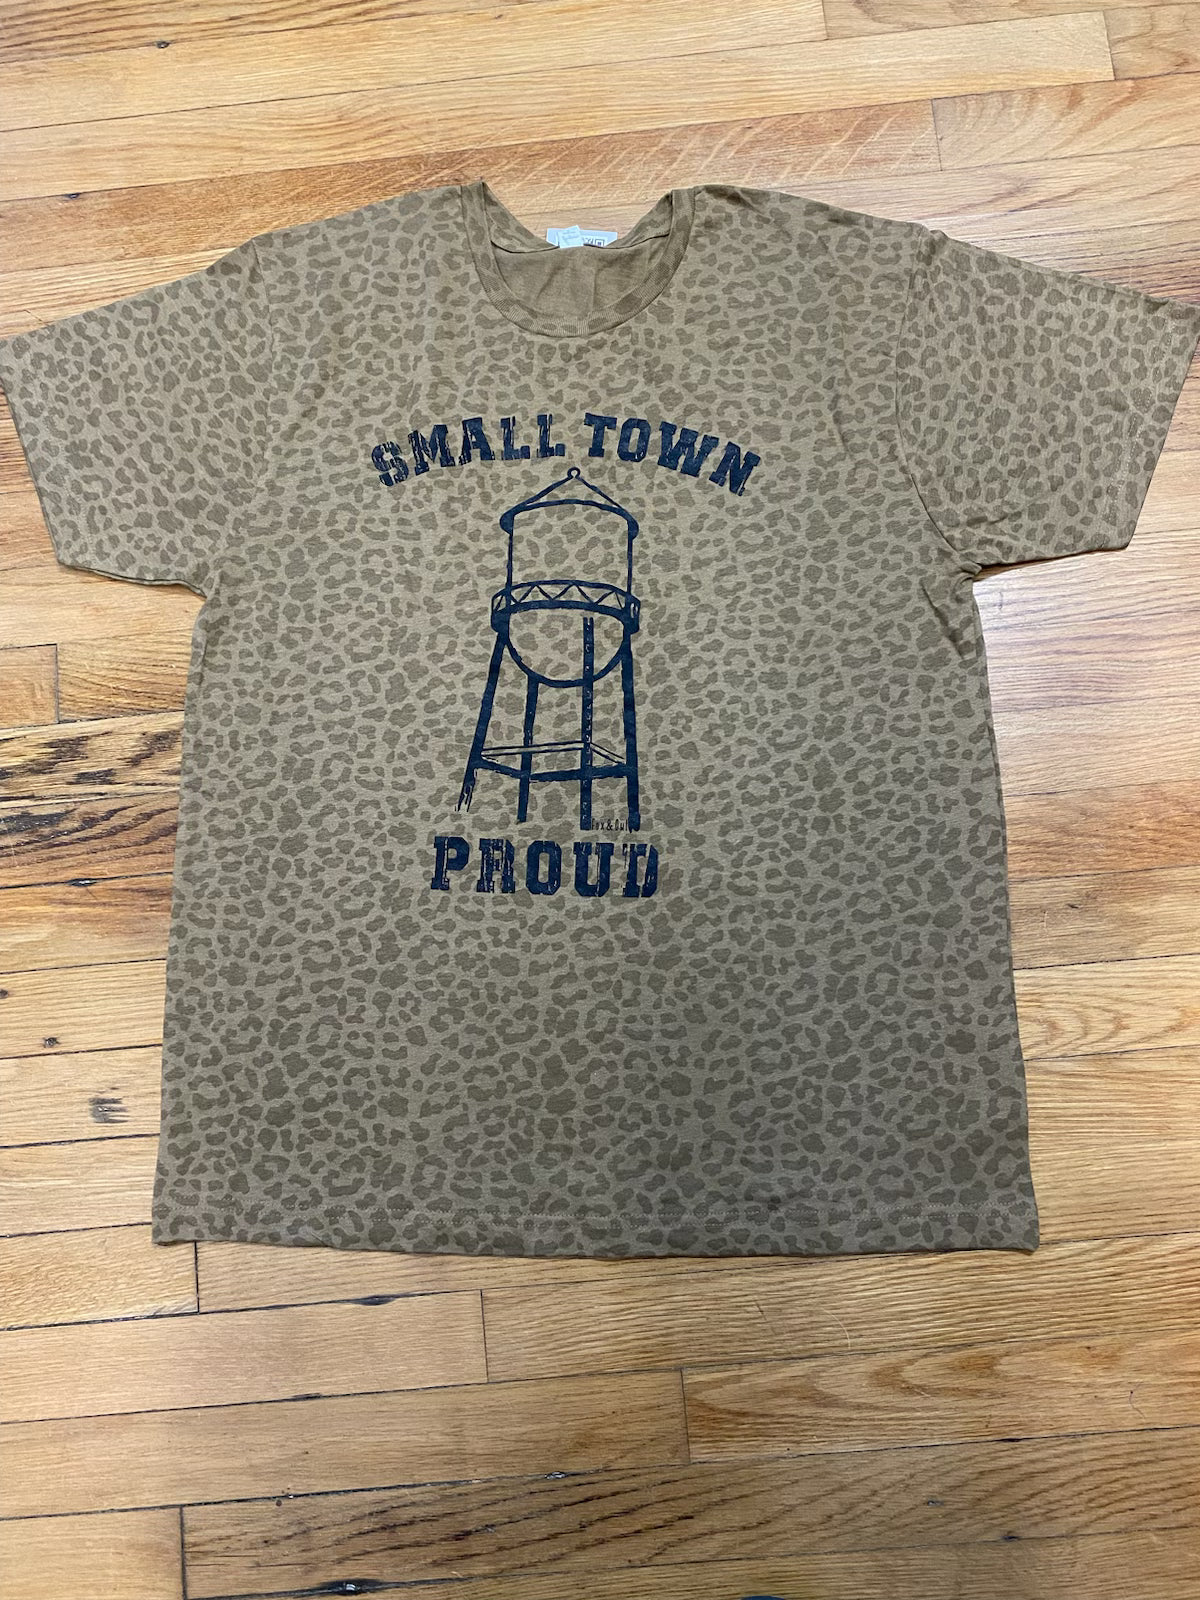 Small Town Proud Leopard Tee